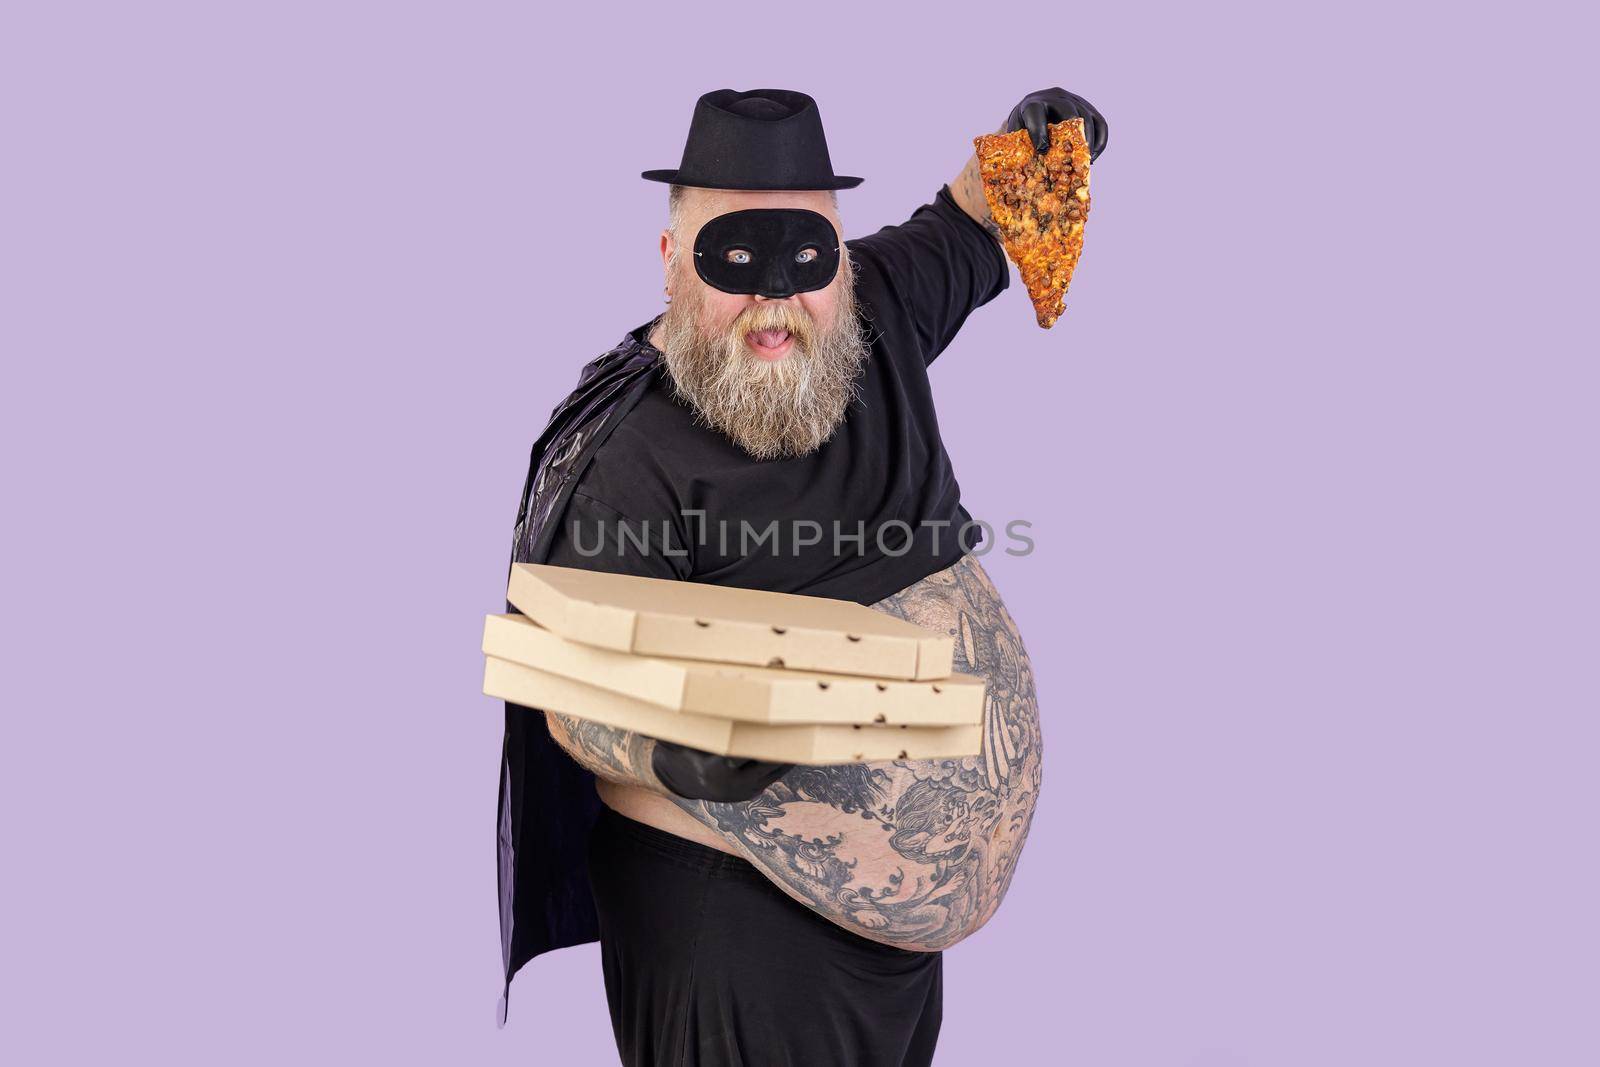 Funny plump man in hero suit holds boxes and pizza slice on purple background by Yaroslav_astakhov